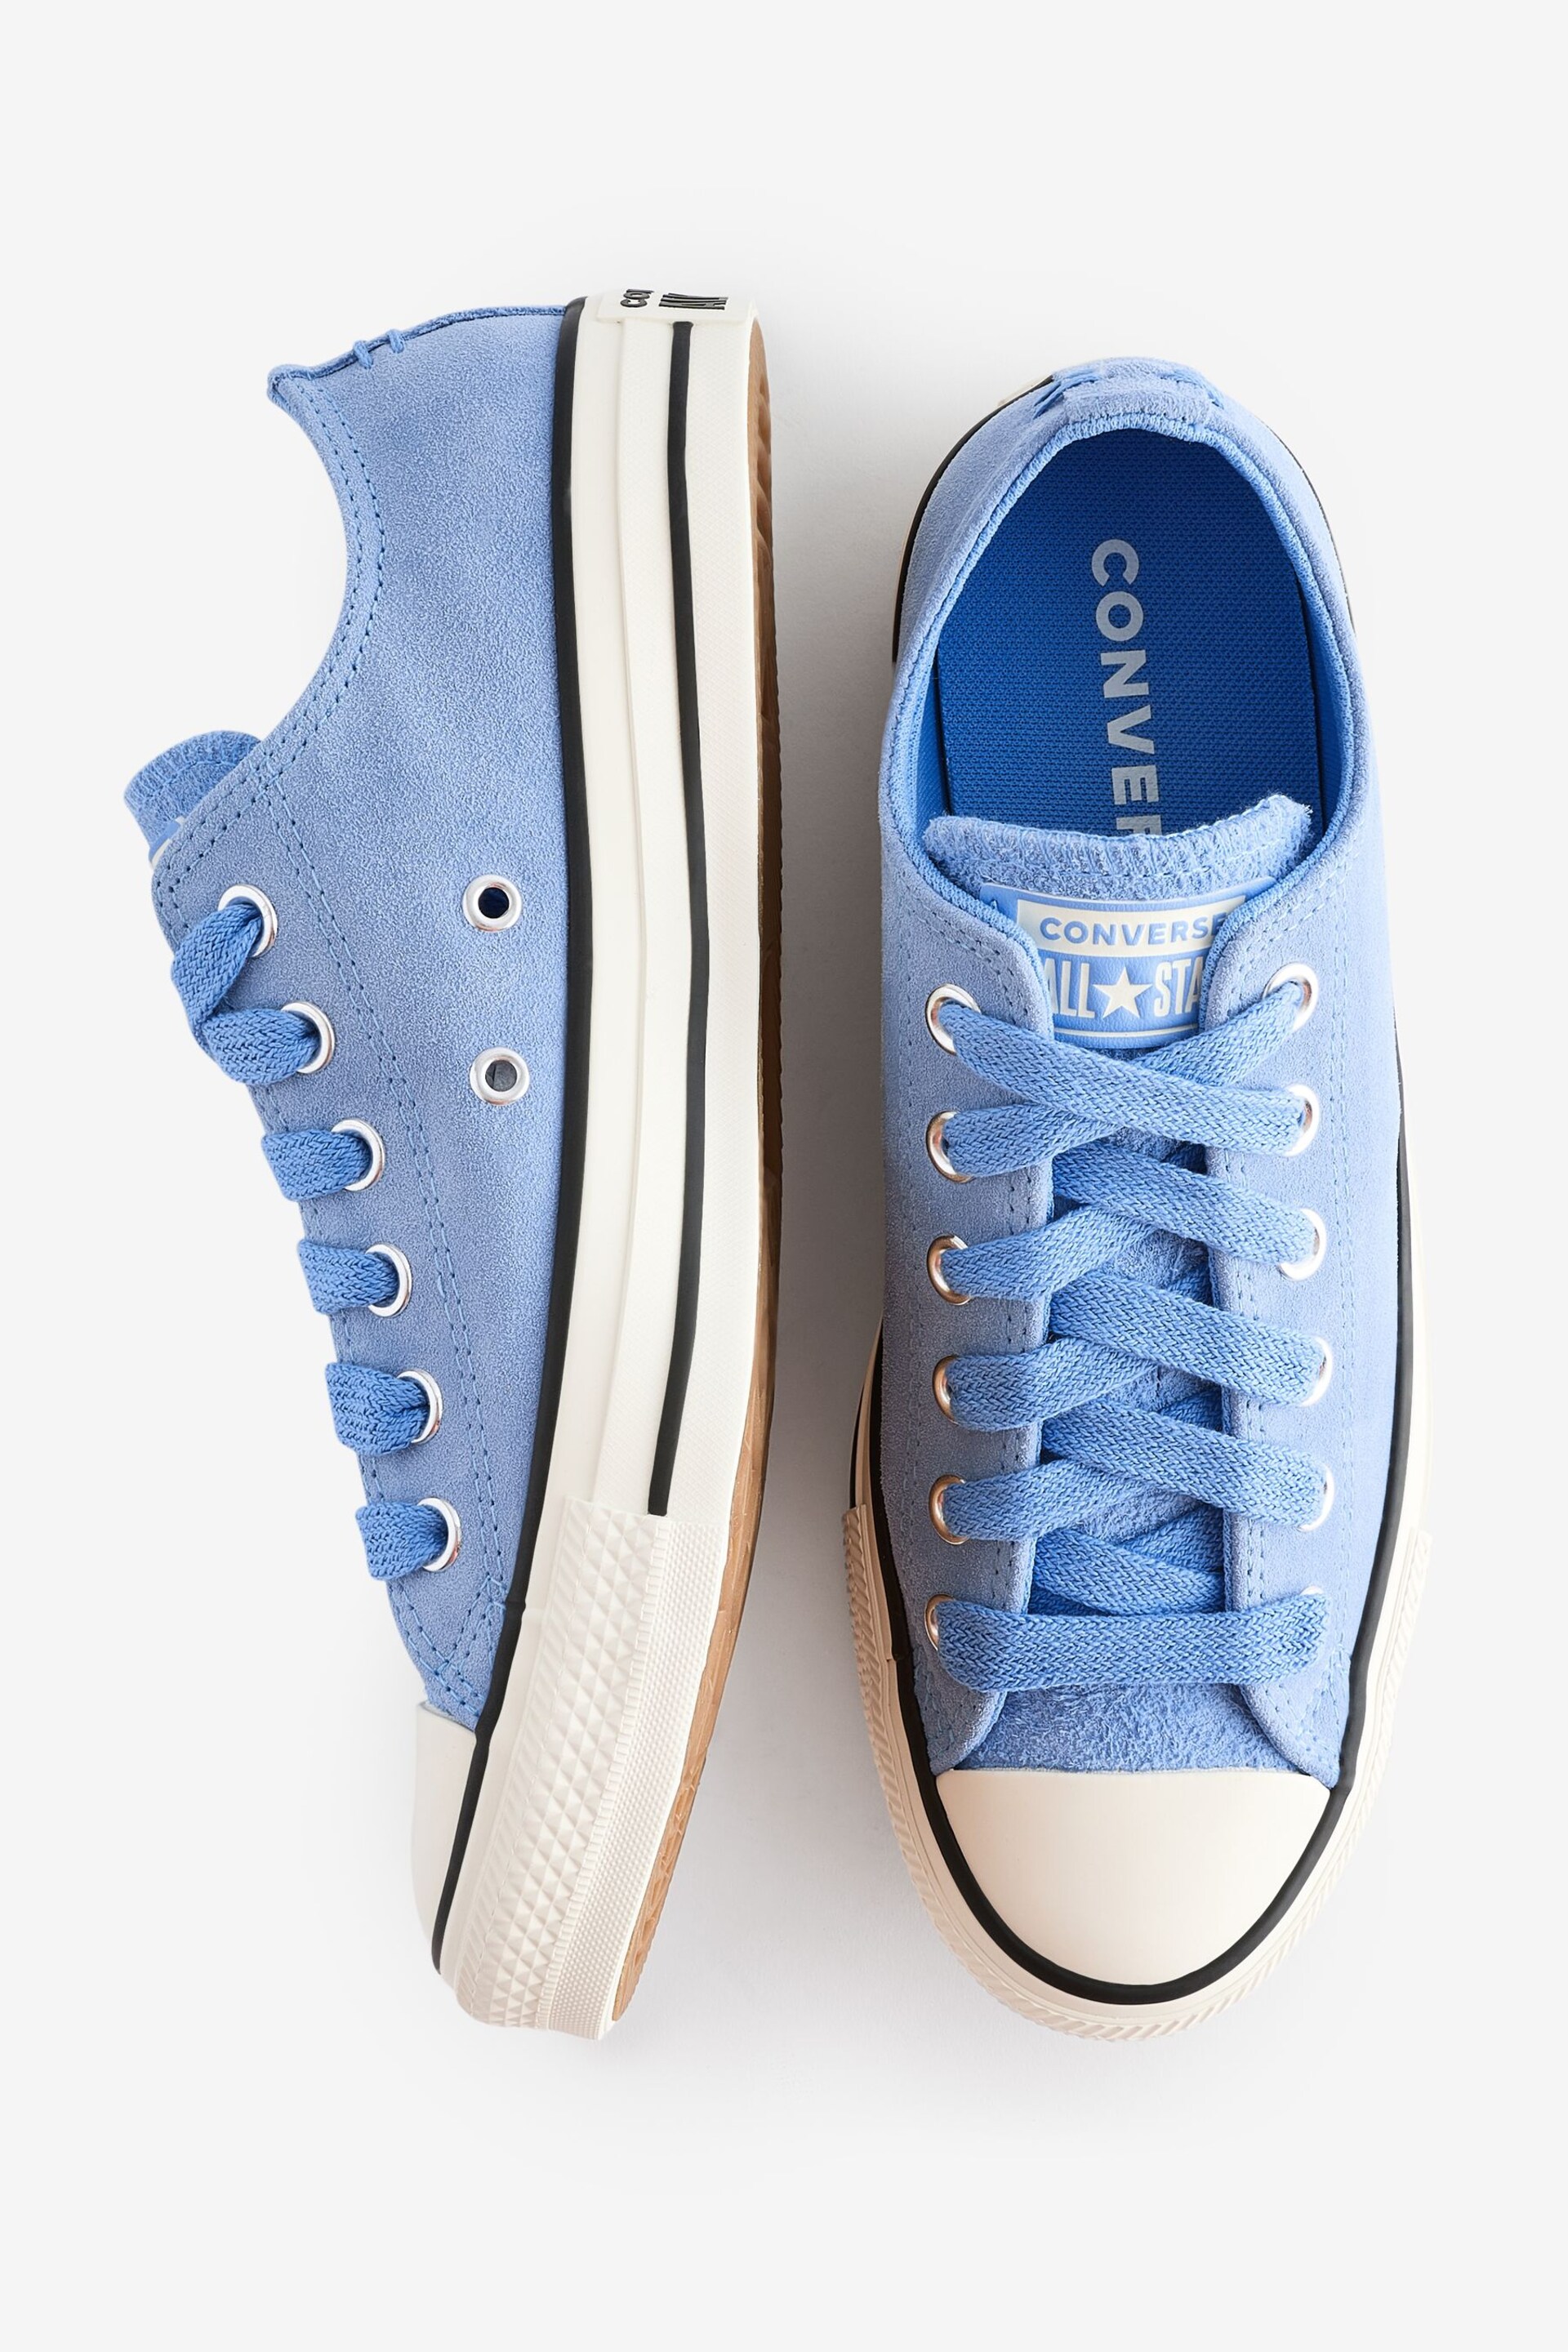 Converse Light Blue Chuck Taylor All Star Suede Ox Trainers - Image 9 of 9